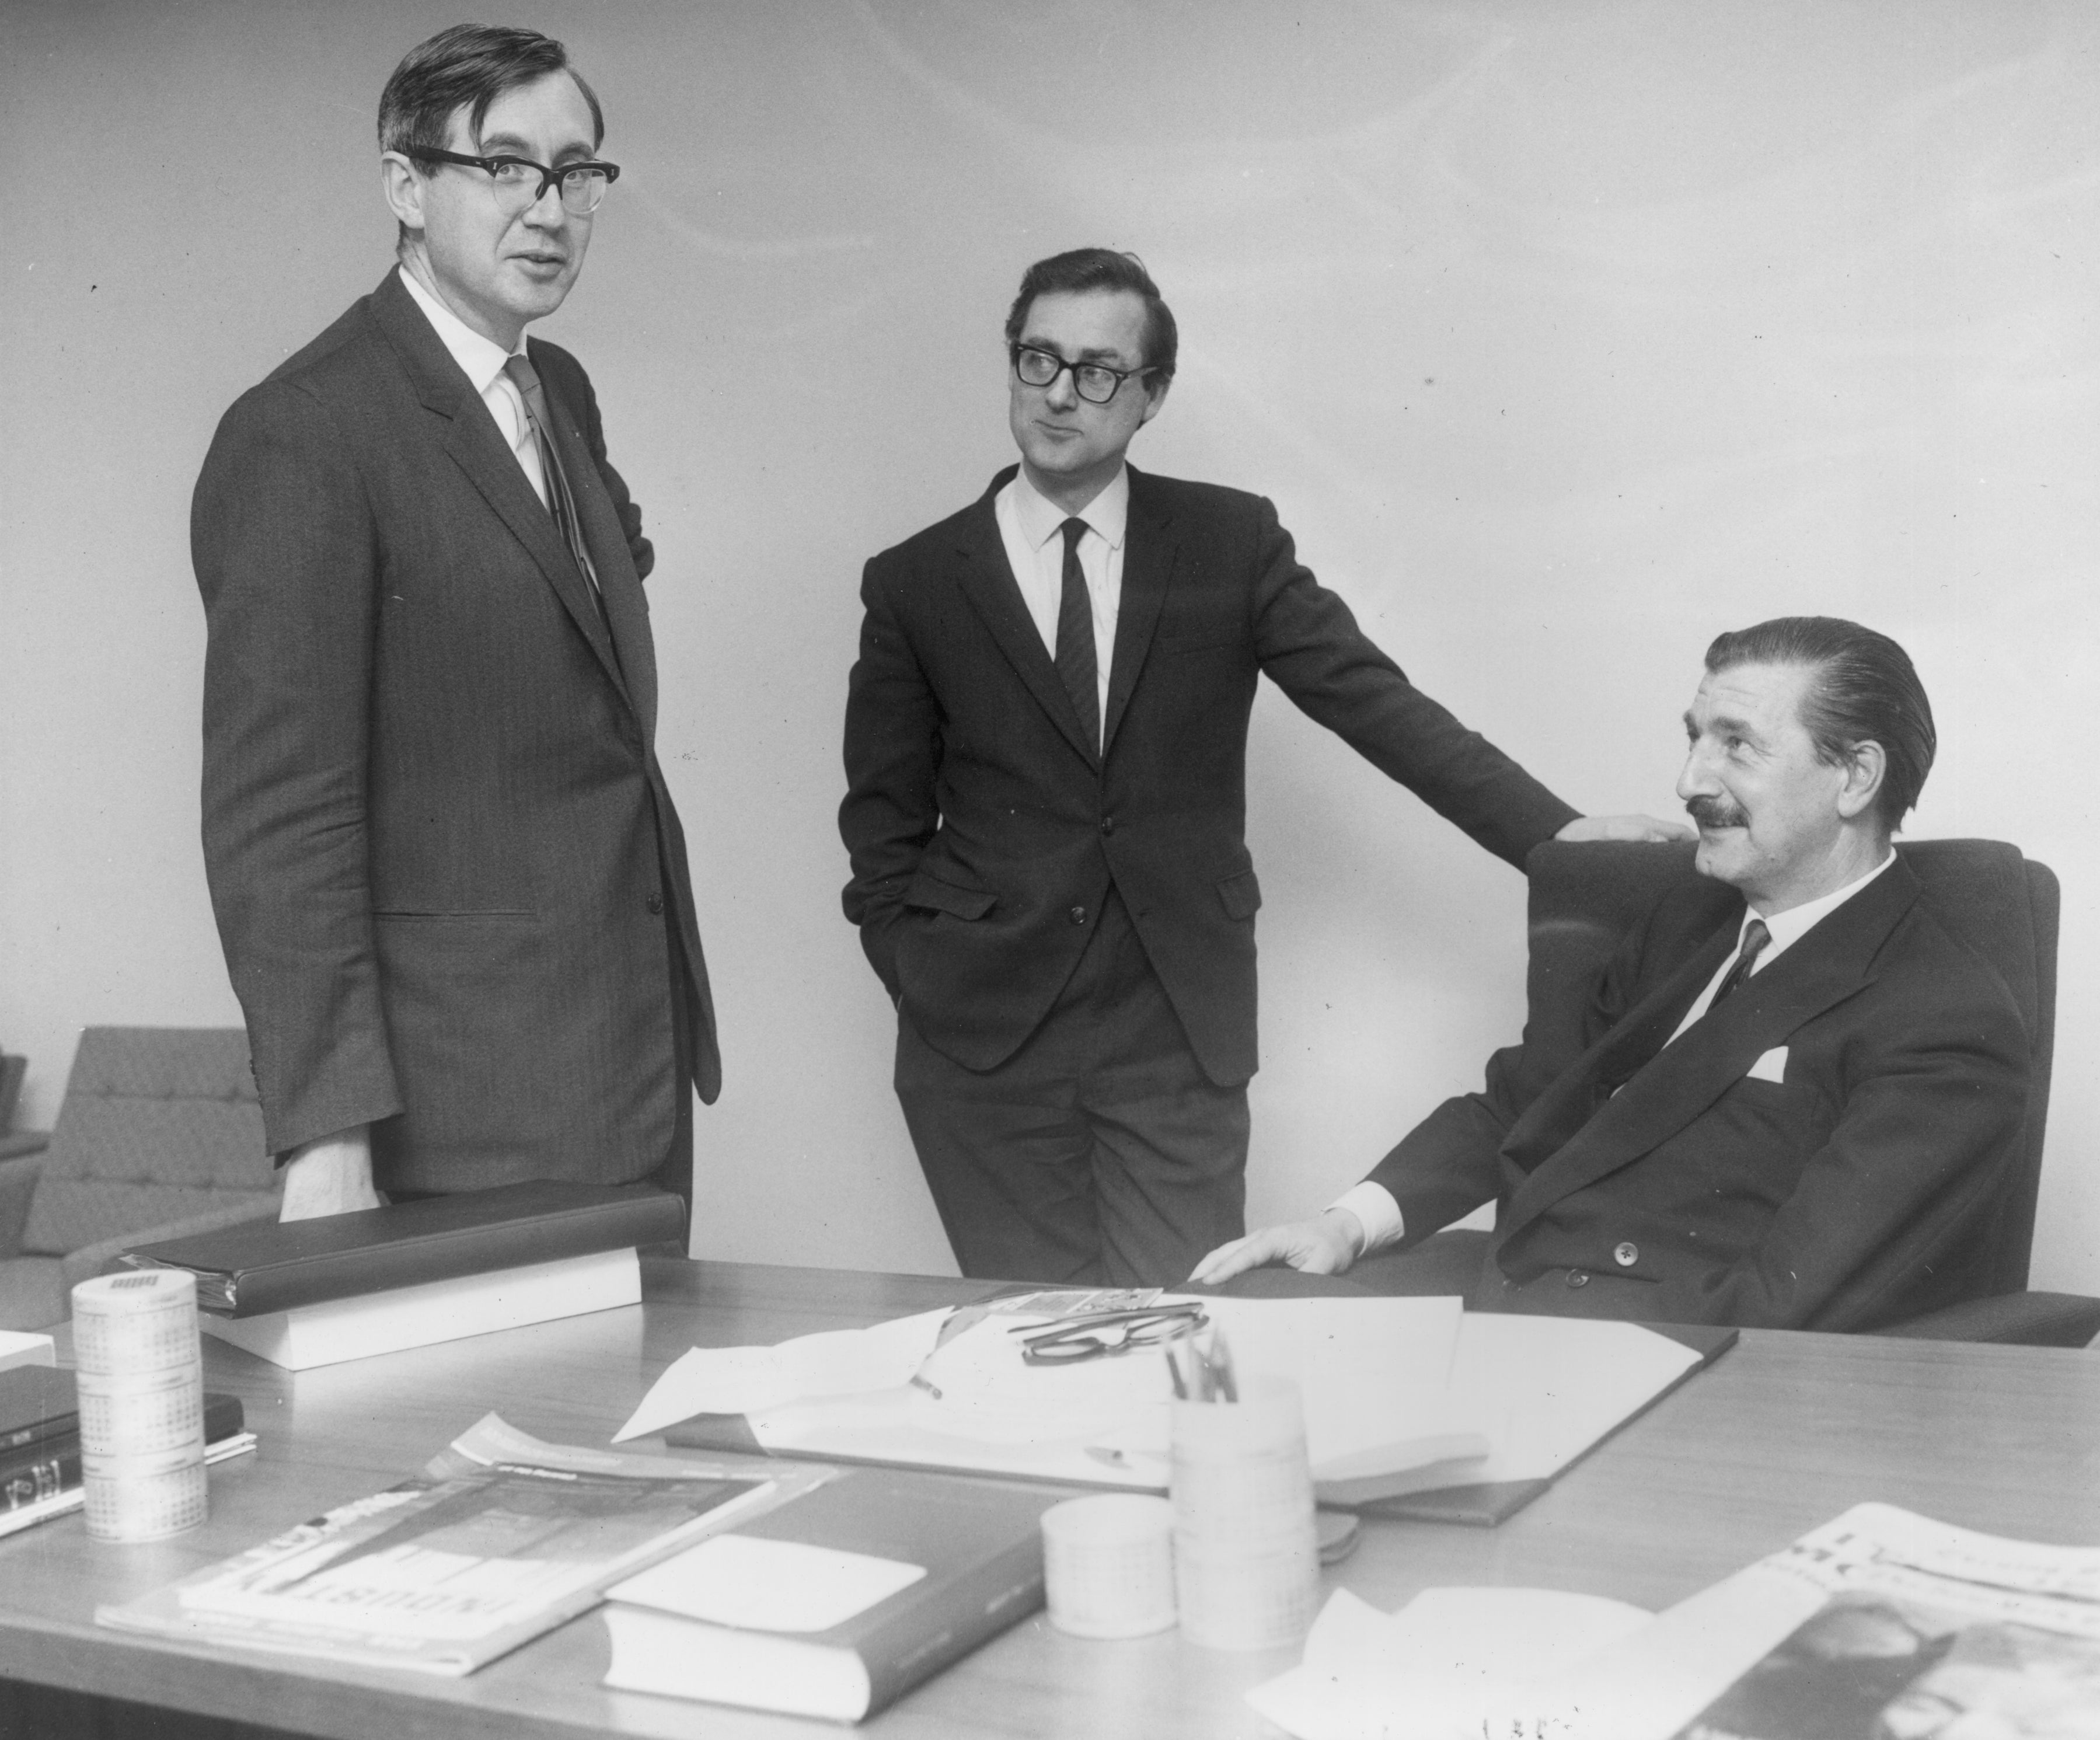 18 January 1967: (from left): William Rees-Mogg, editor of ‘The Times’; Harold Evans, editor of ‘The Sunday Times’; and Denis Hamilton, editor-in-chief of both newspapers